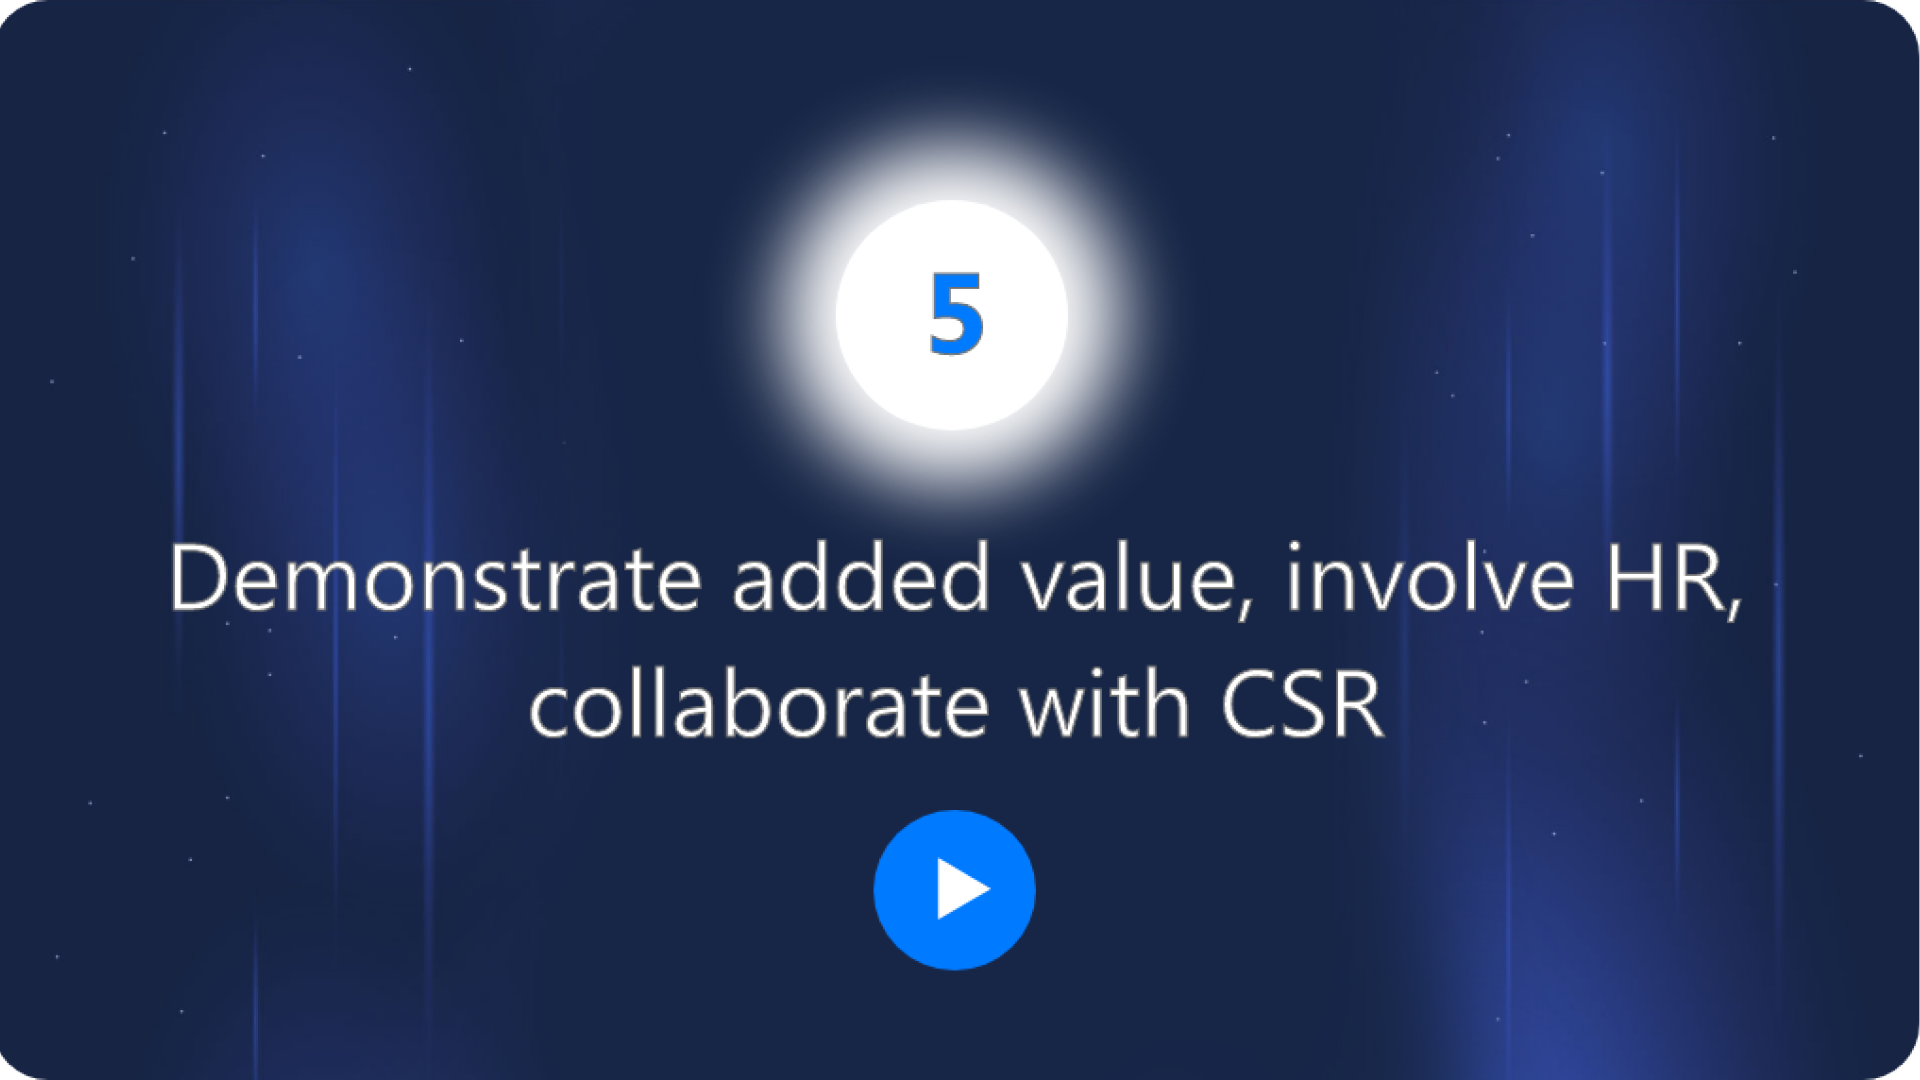 Demonstrate added value, involve HR, collaborate with CSR